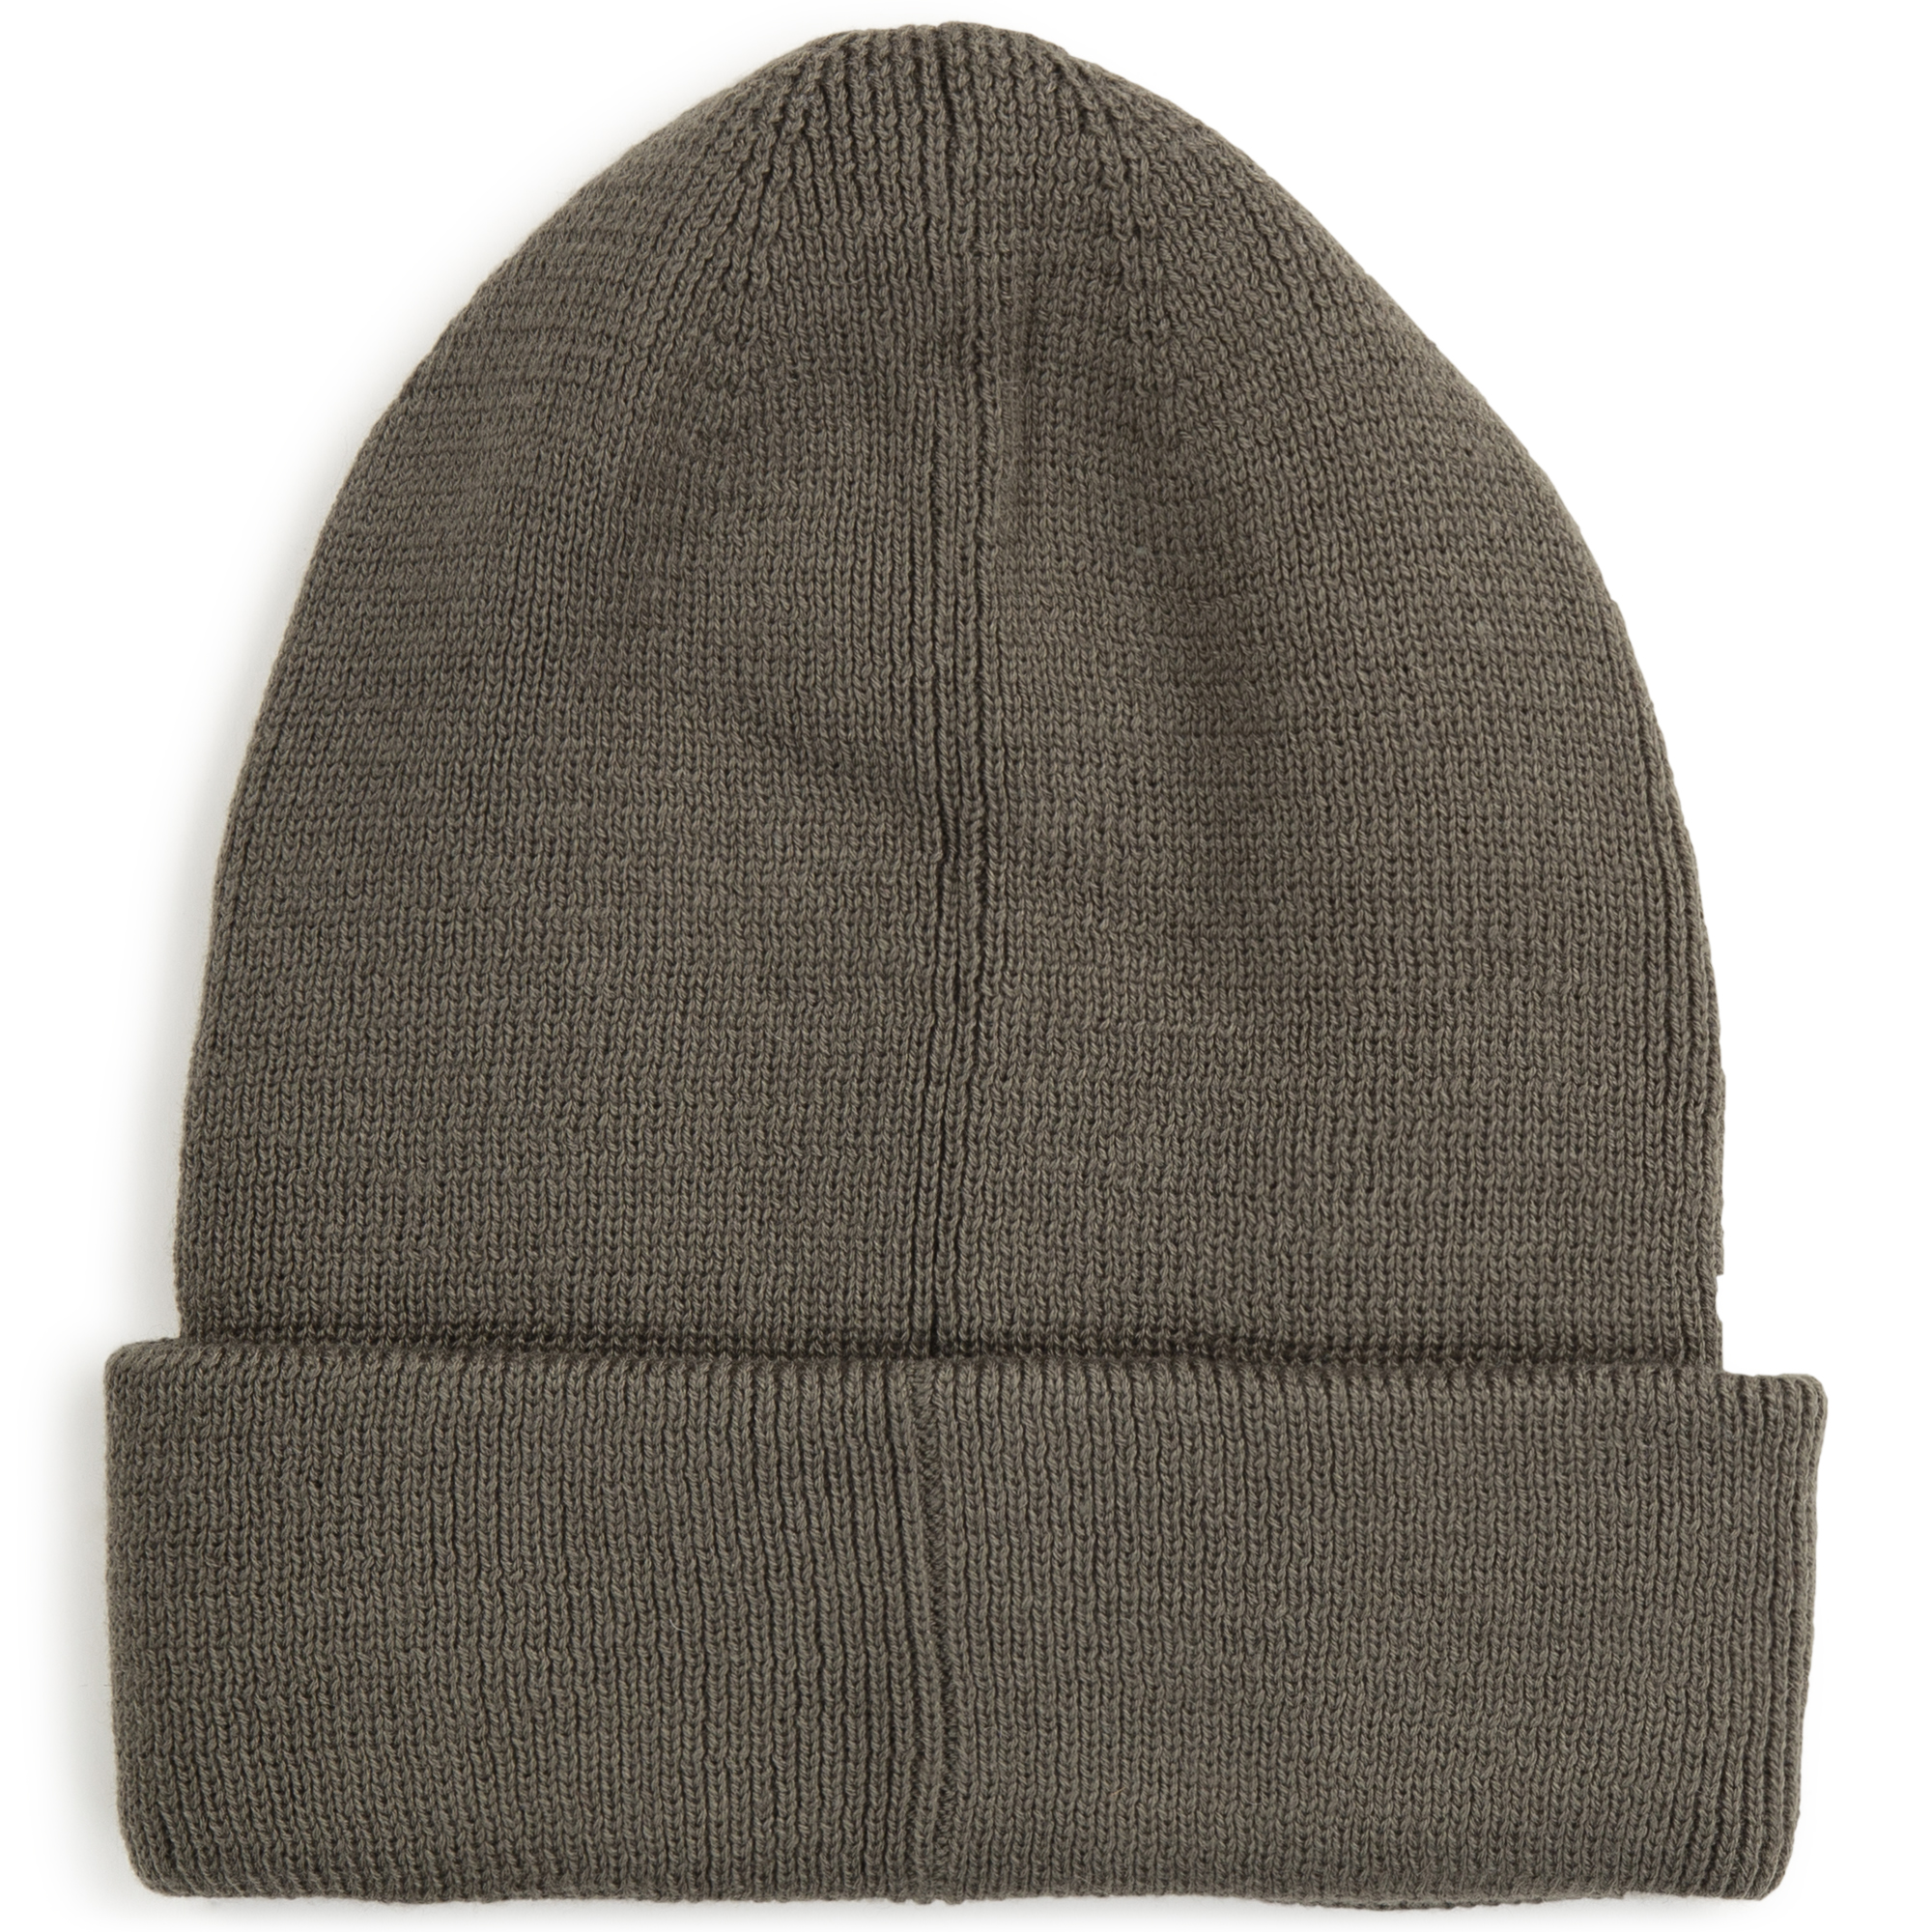 Double-layer knitted hat BOSS for BOY